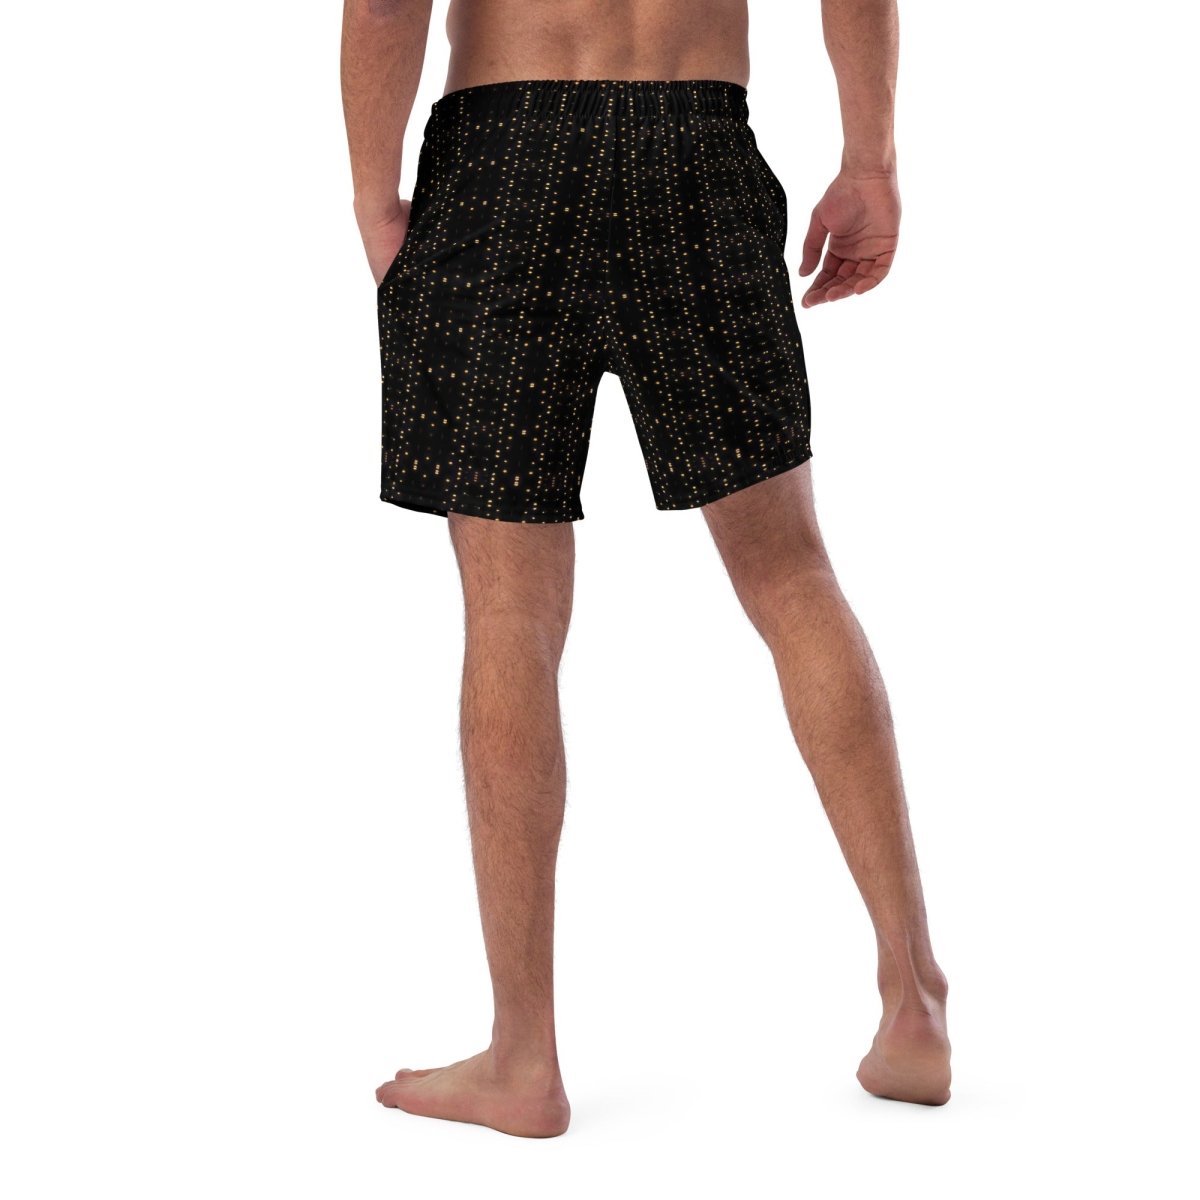 Sefira Summer Festival Recycled Swim Trunks | Sefira Beach Collection Man - Sefira Collections